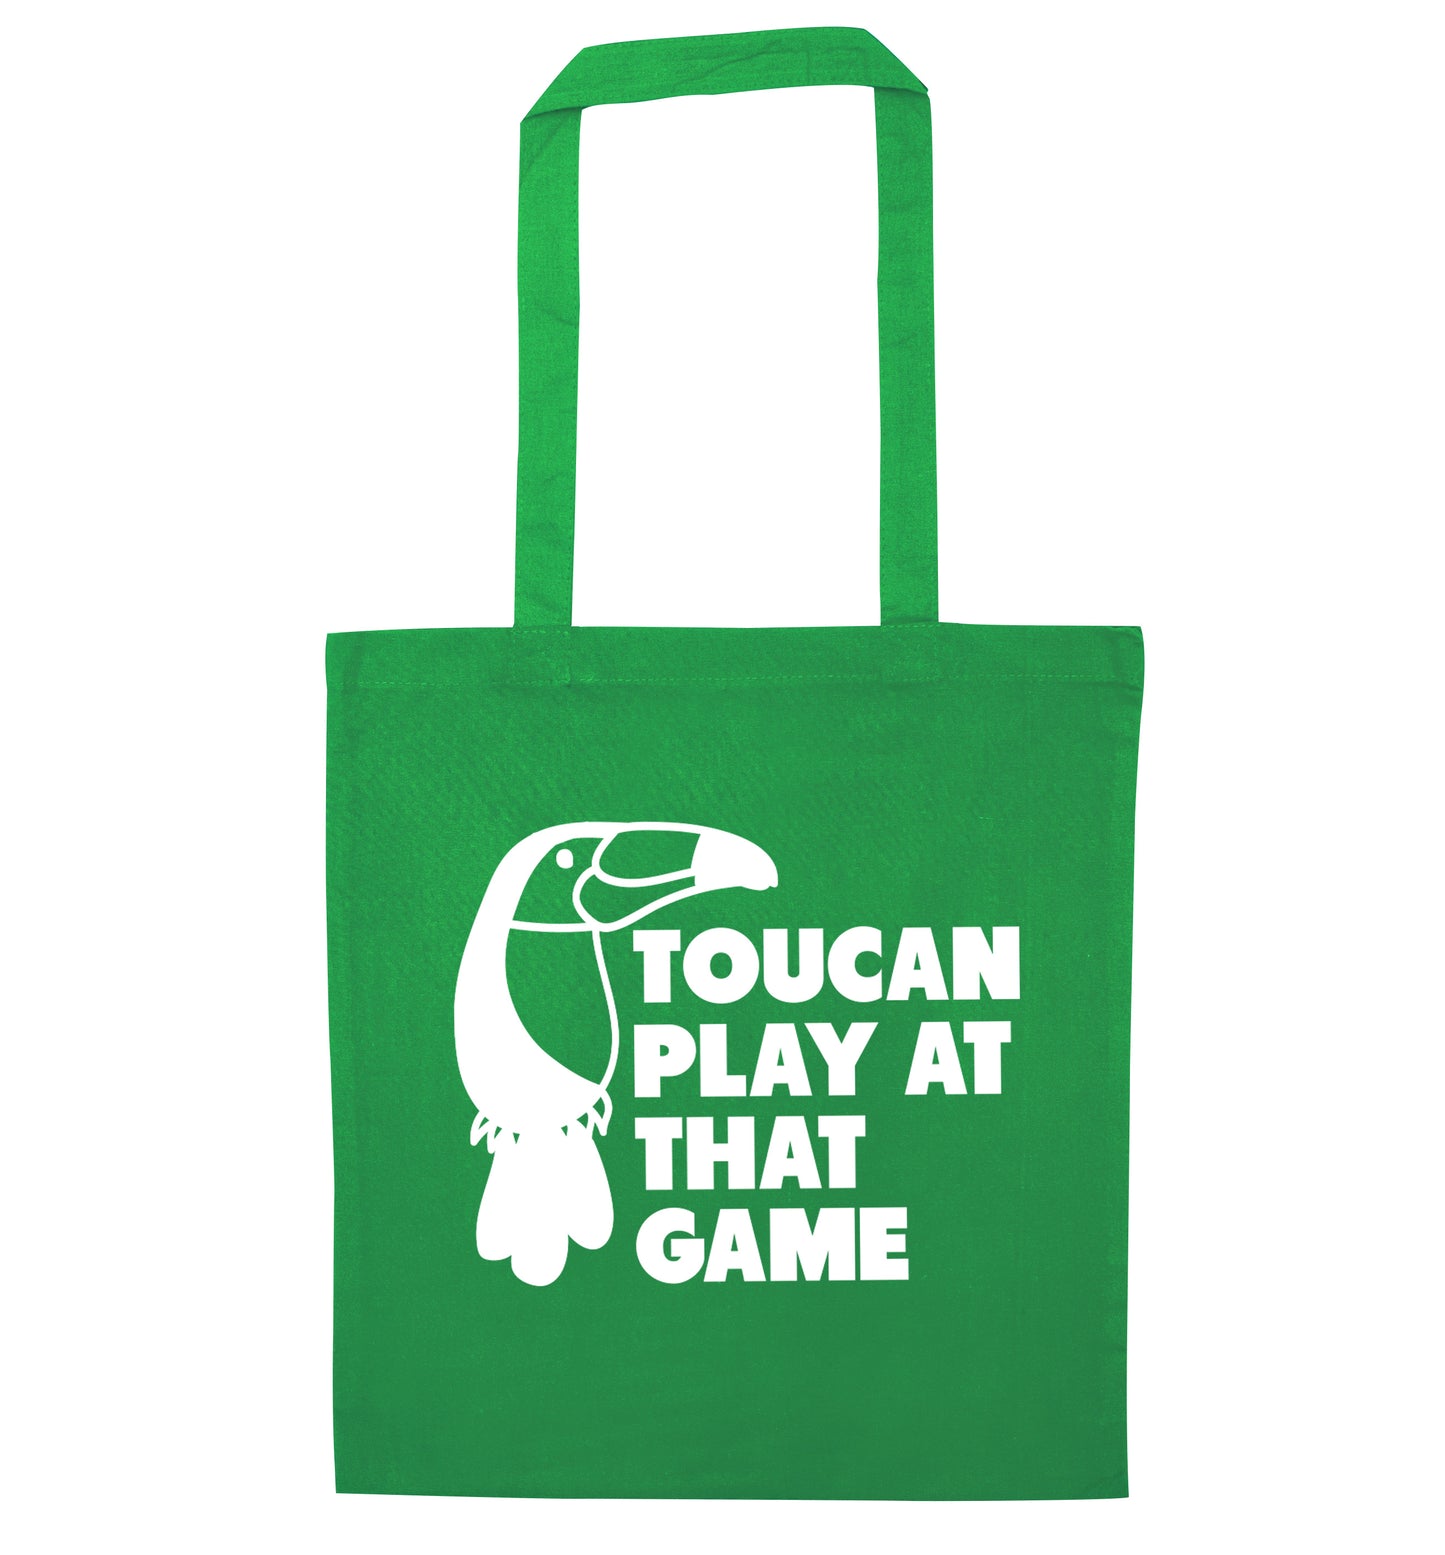 Toucan play at that game green tote bag